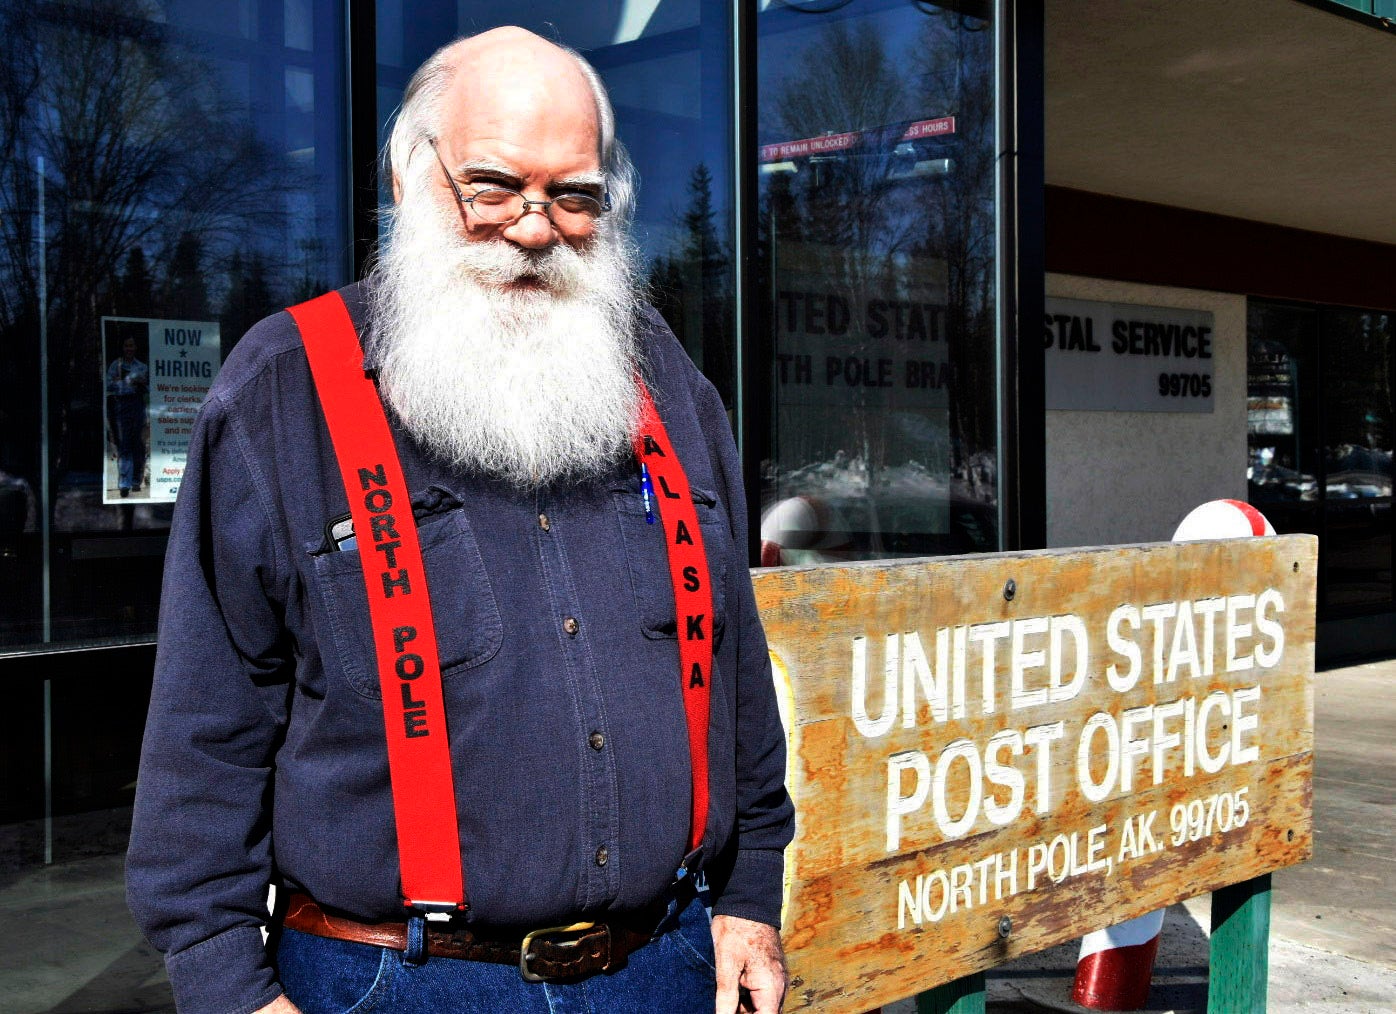 Santa Claus stands in front of the North Pole post office